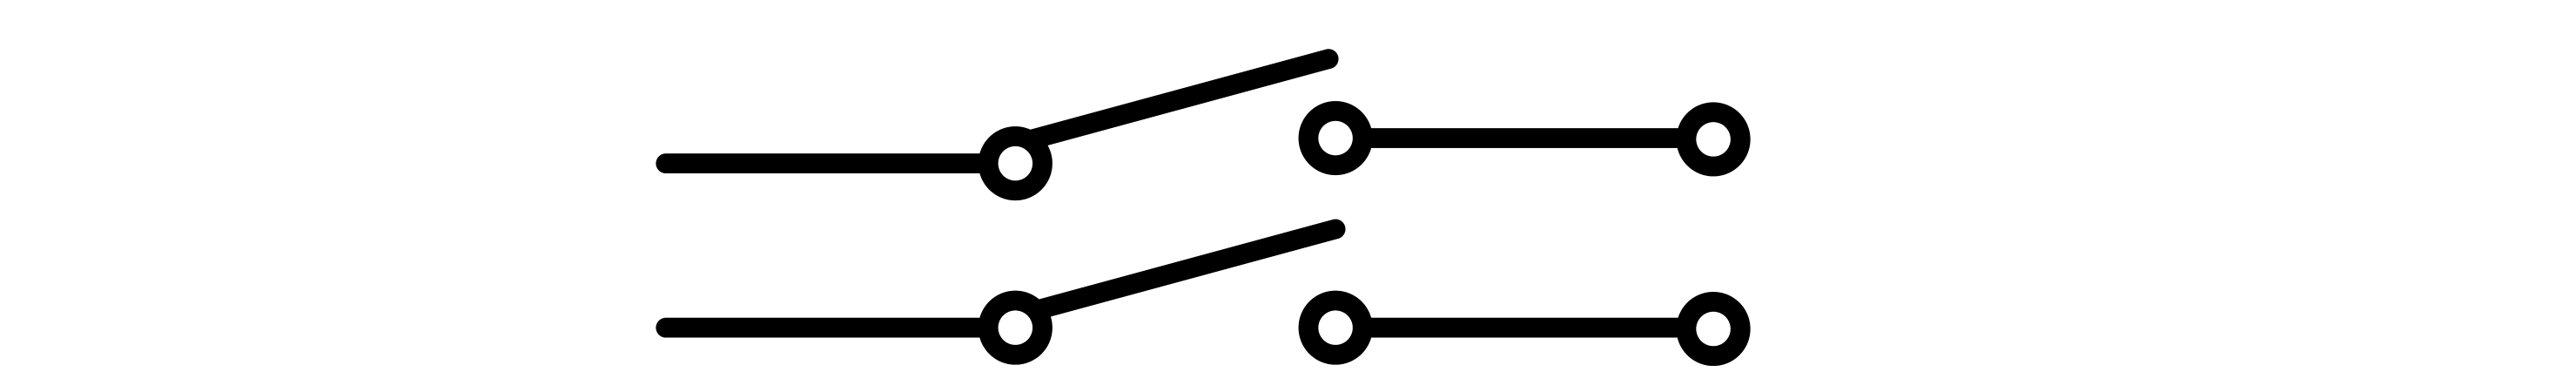 Figure 9: Double Pole Single Throw (DPST) Switch